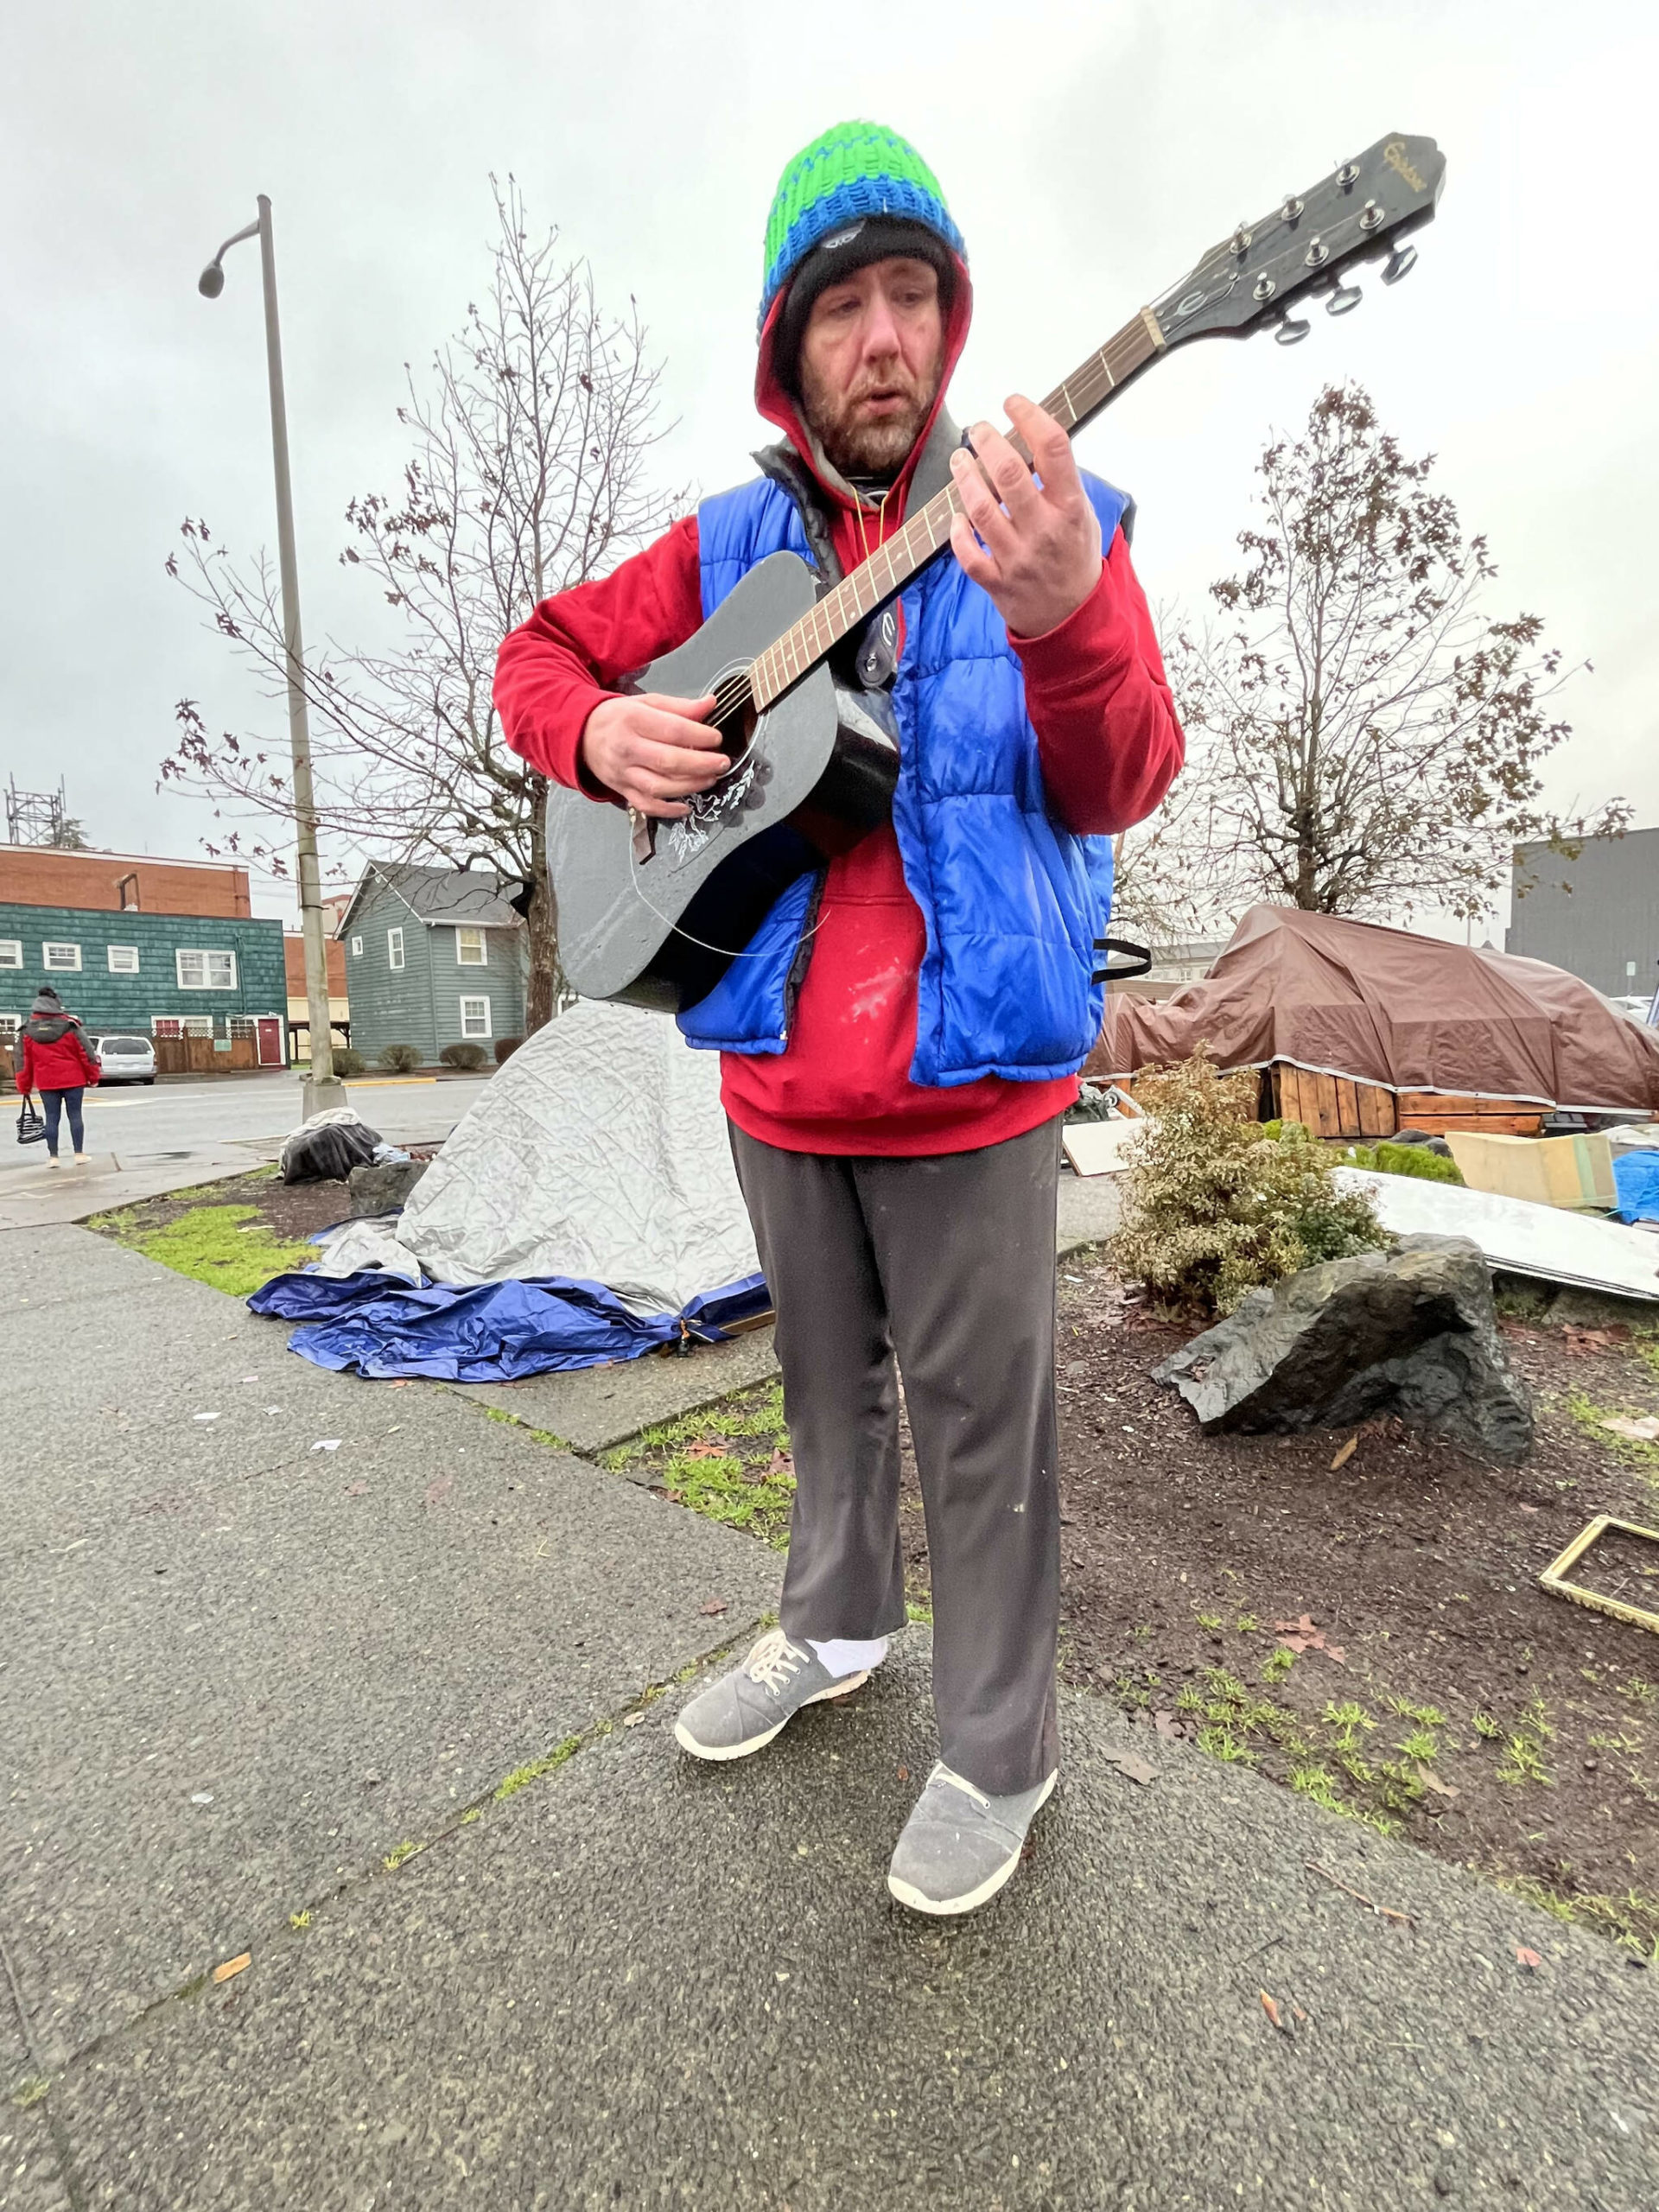 Matthew N. Wells | The Daily World 
Andrew “Drew” Carey plays his Epiphone acoustic guitar, with four working strings, on Friday Jan. 7, 2022, at the now non-sanctioned homeless encampment behind Aberdeen City Hall. The camp was closed after a narrow city council vote in November 2021.